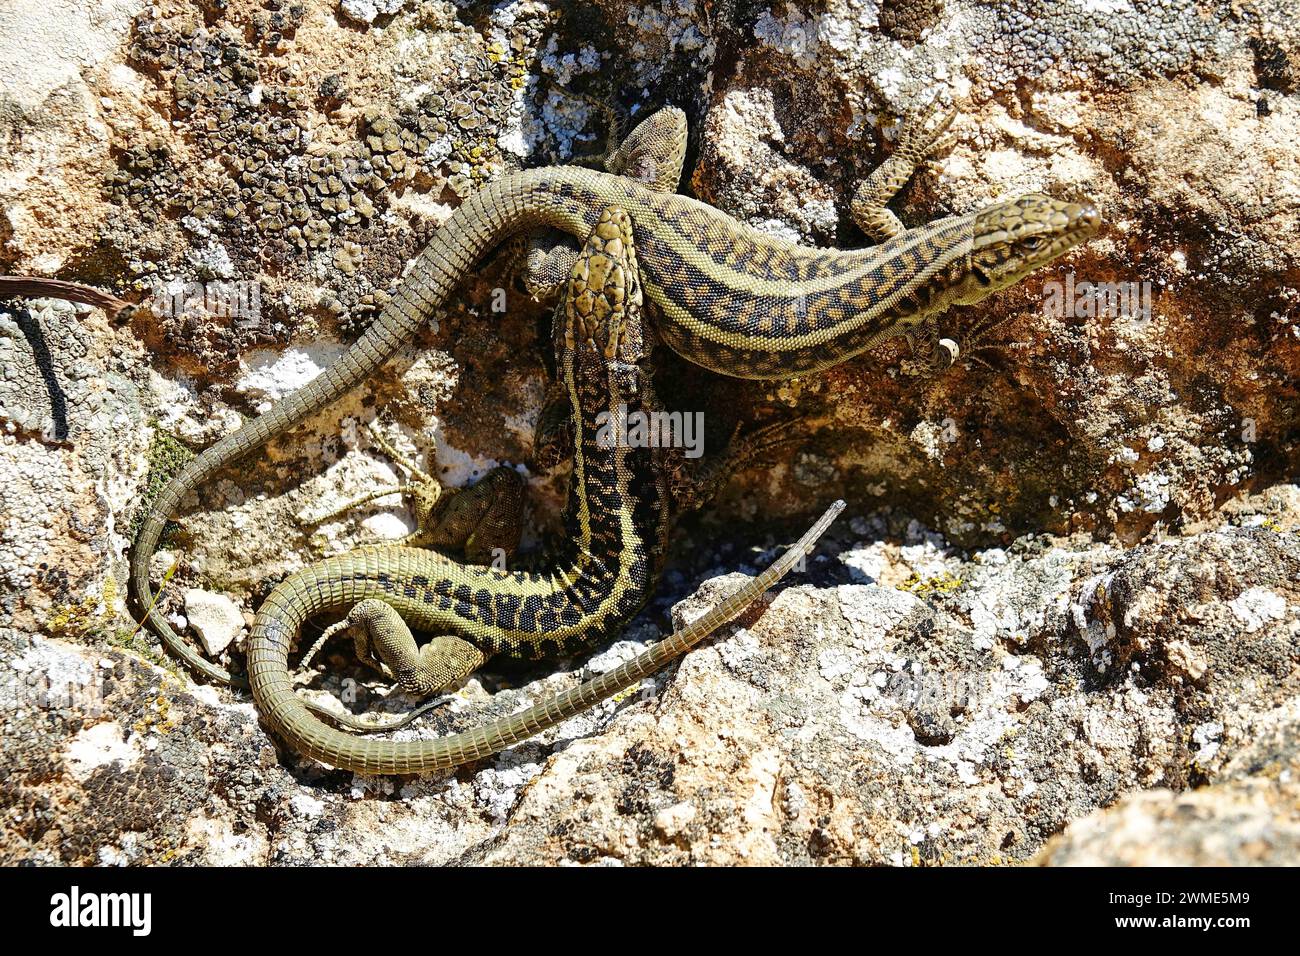 A male lizard is seen biting a female to mate. This ensures that she doesn't move. In Savur district of Mardin in Turkey, lizards mated one month earlier than normal due to global warming. Lizards normally mate between April and August. Stock Photo